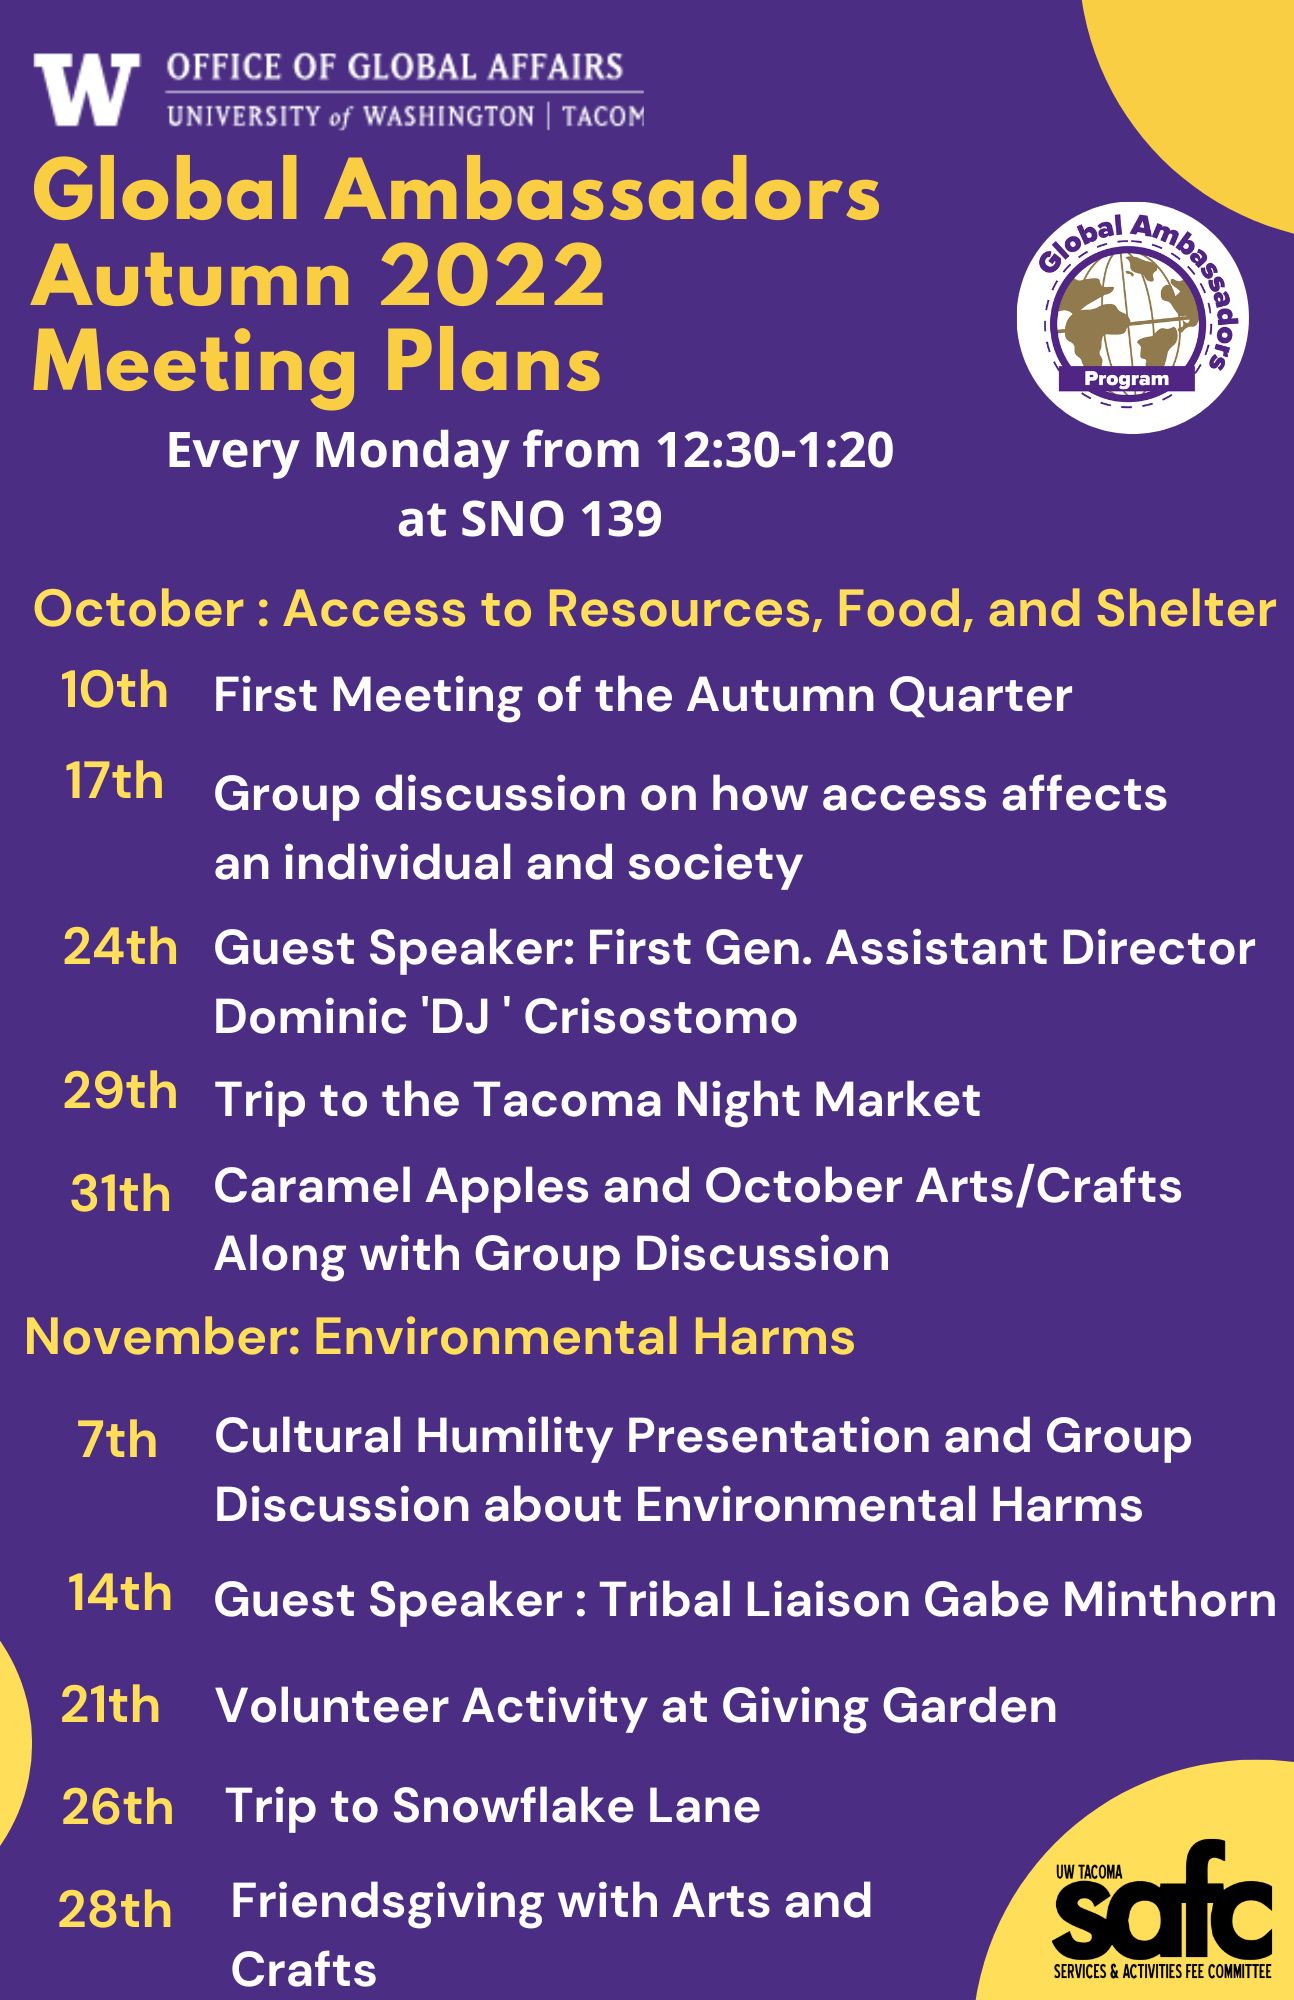 The is a calendar of all the Global Ambassadors Events for the entire Autumn Quarter. October : Access to Resources, Food, and Shelter 10th First Meeting of the Autumn Quarter 17th Group discussion on how access affects an individual and society 24th Guest Speaker: First Gen. Assistant Director Dominic 'DJ ' Crisostomo 29th Trip to the Tacoma Night Market  31st Caramel Apples and October Arts/Crafts. Please email globala@uw.edu for the whole schedule since it would not fit on the alternate text. Thank you!